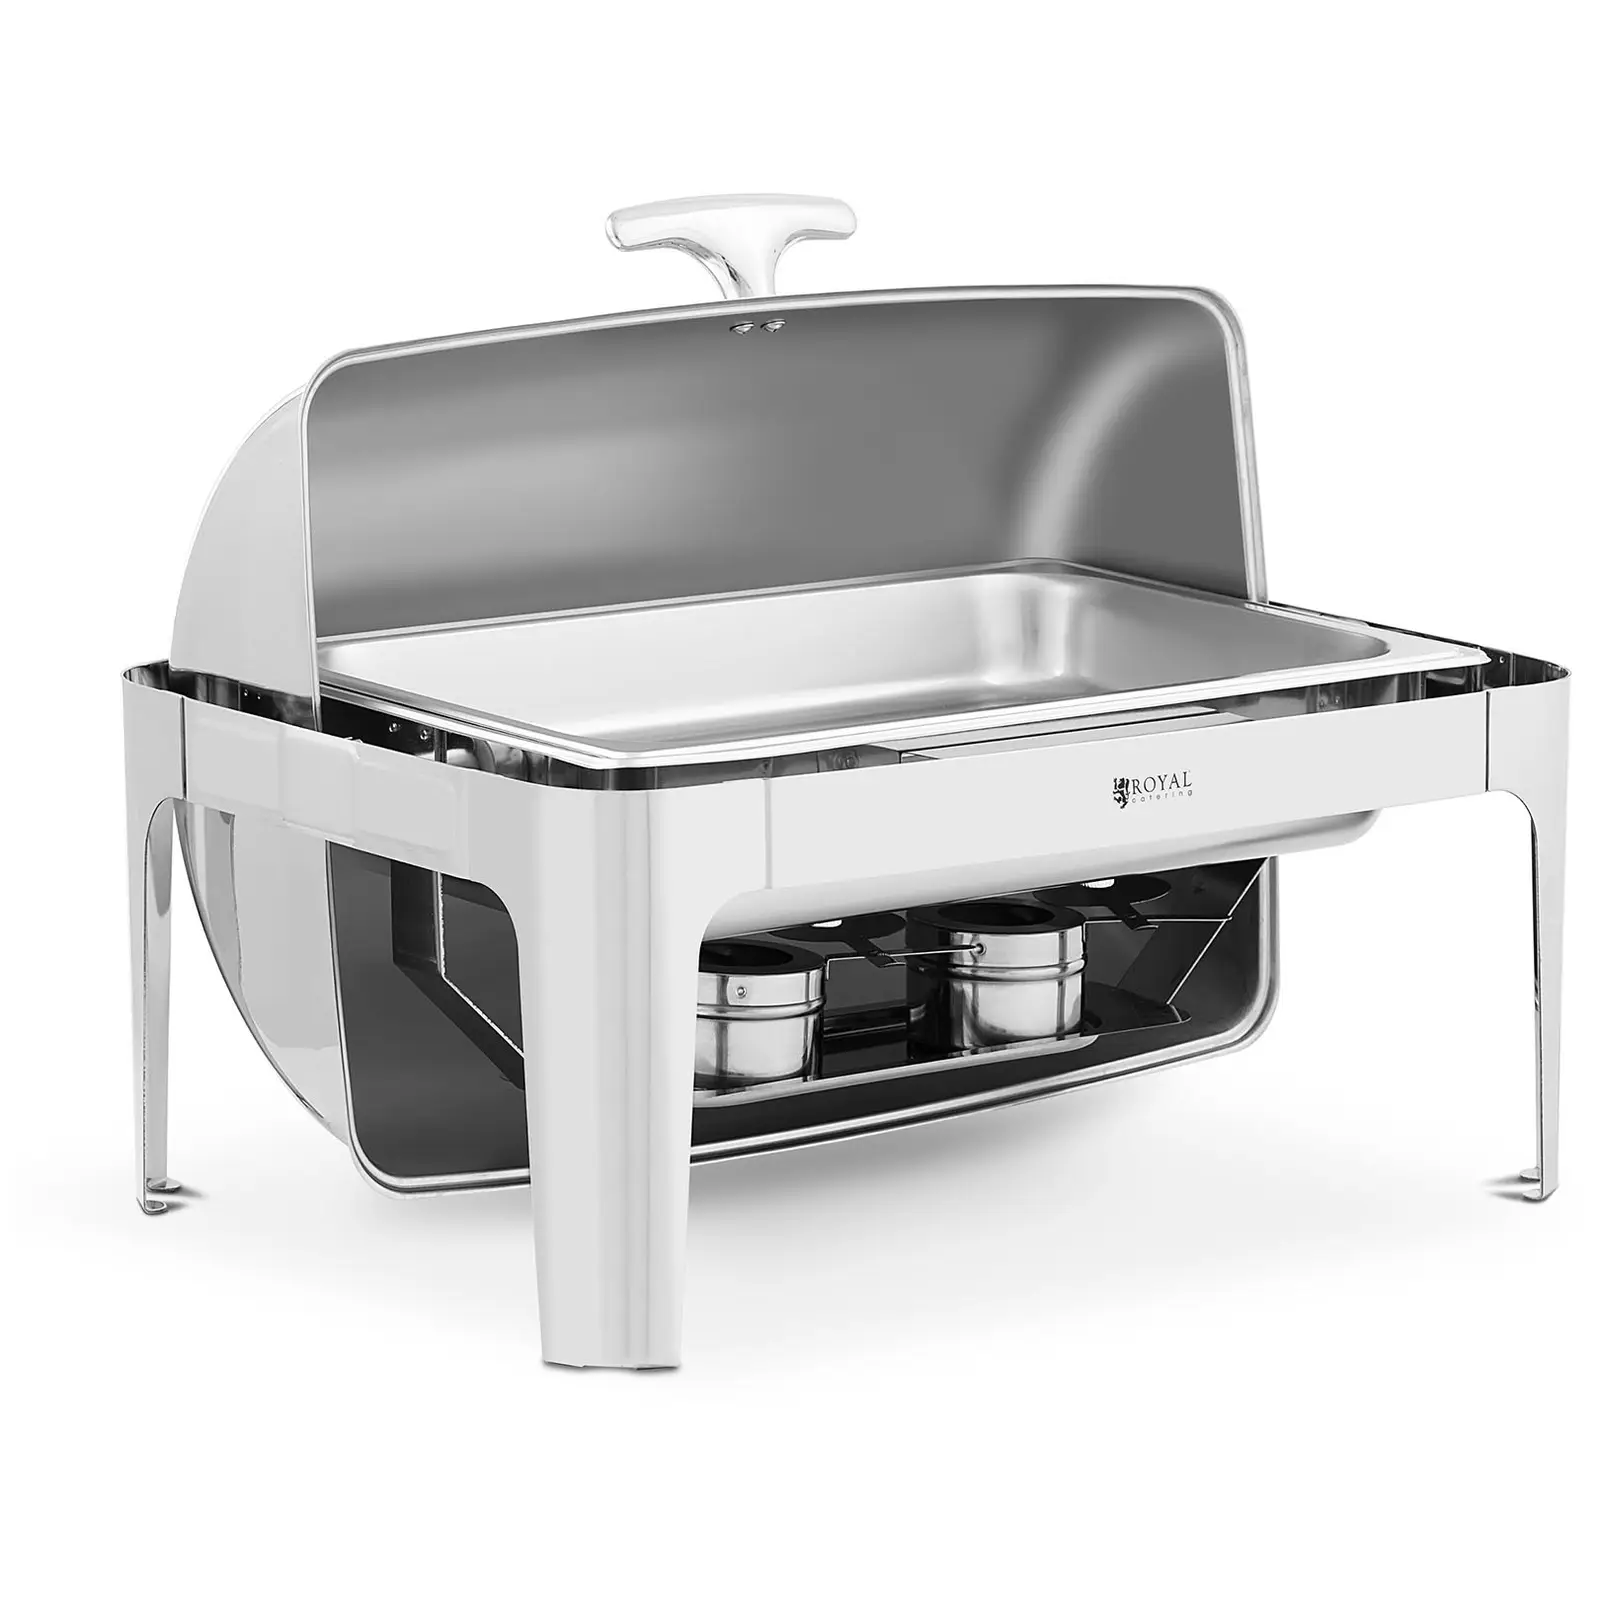 Chafing dish - GN 1/1 - Royal Catering - 8,5 L - 2 bränsleceller - Rullock